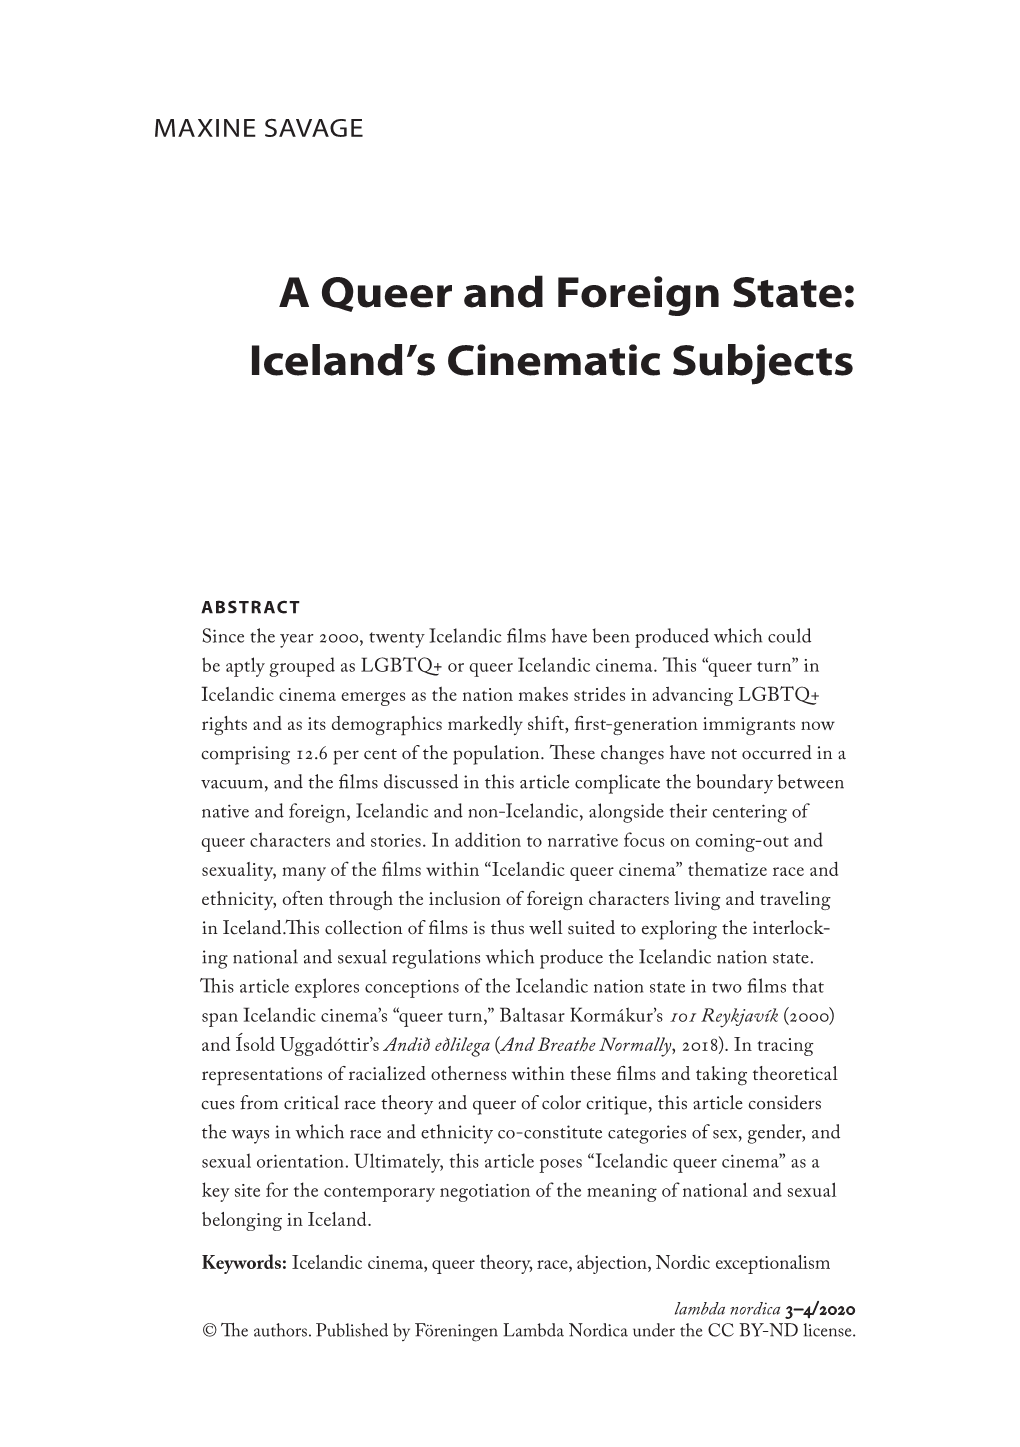 A Queer and Foreign State: Iceland’S Cinematic Subjects